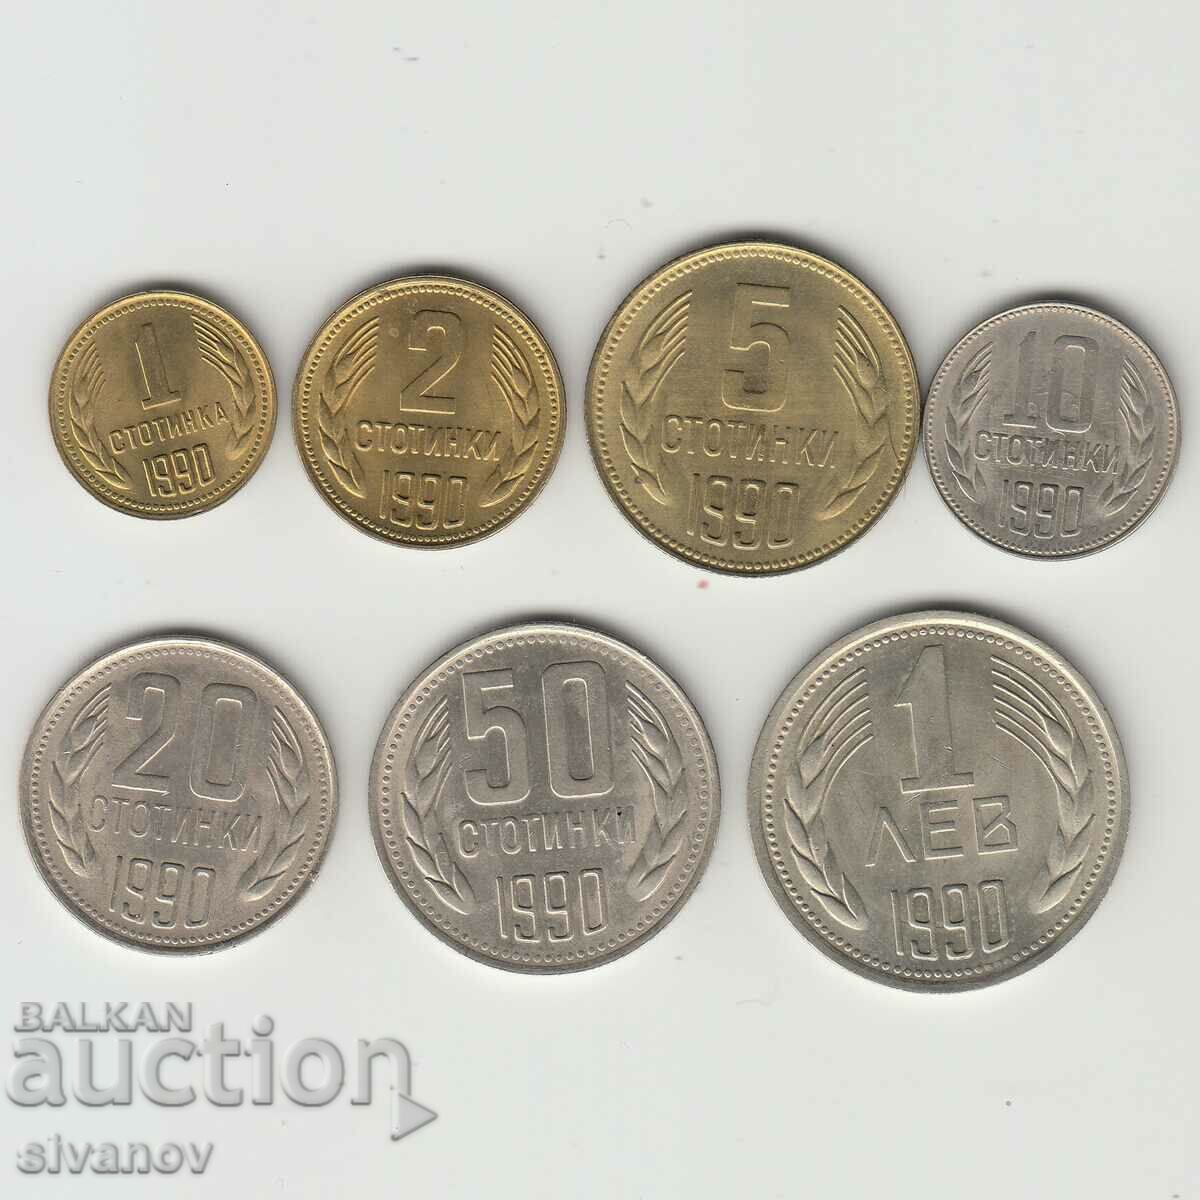 Bulgaria 1,2,5,10,20,50 cents and 1 lev 1990 #5401